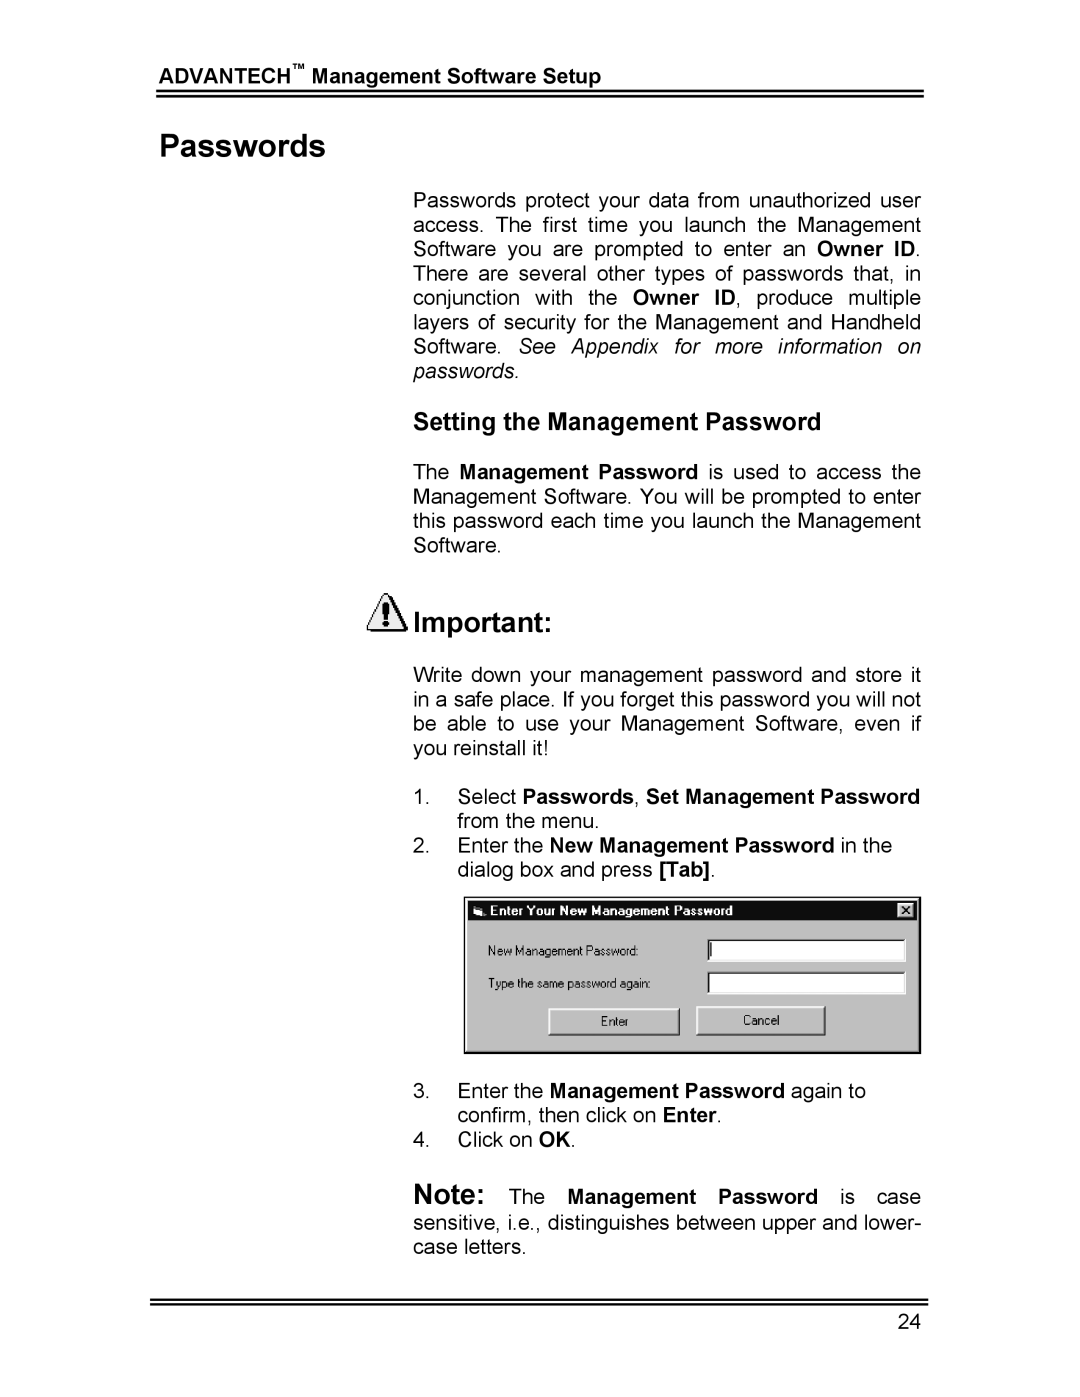 Whirlpool CL-8 user manual Passwords, Setting the Management Password 